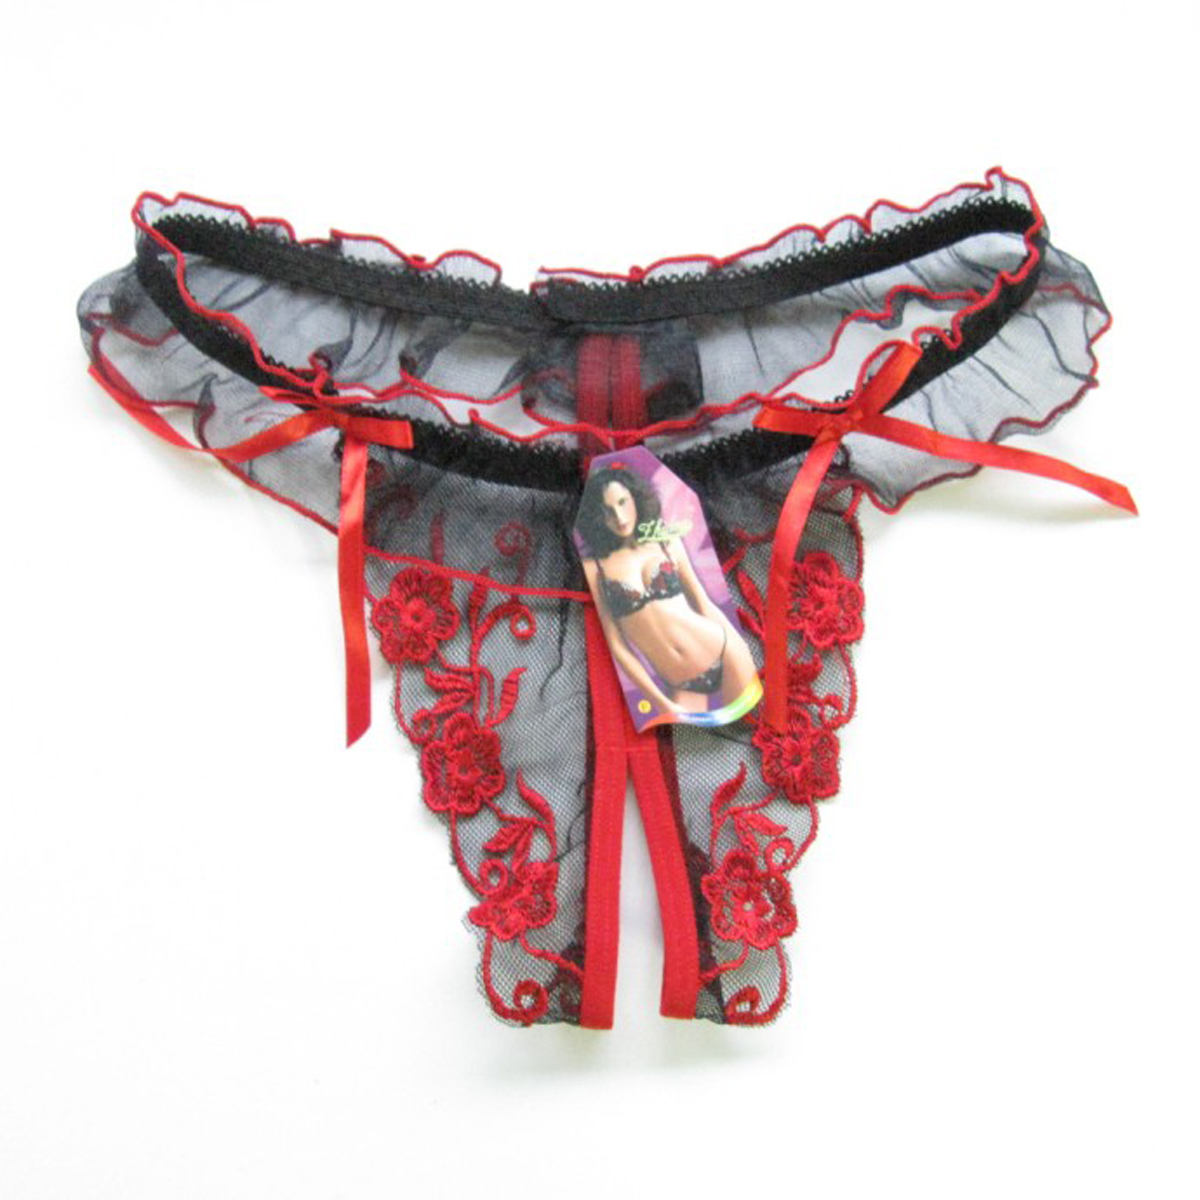 Flower Embroidered Crotchless Panties